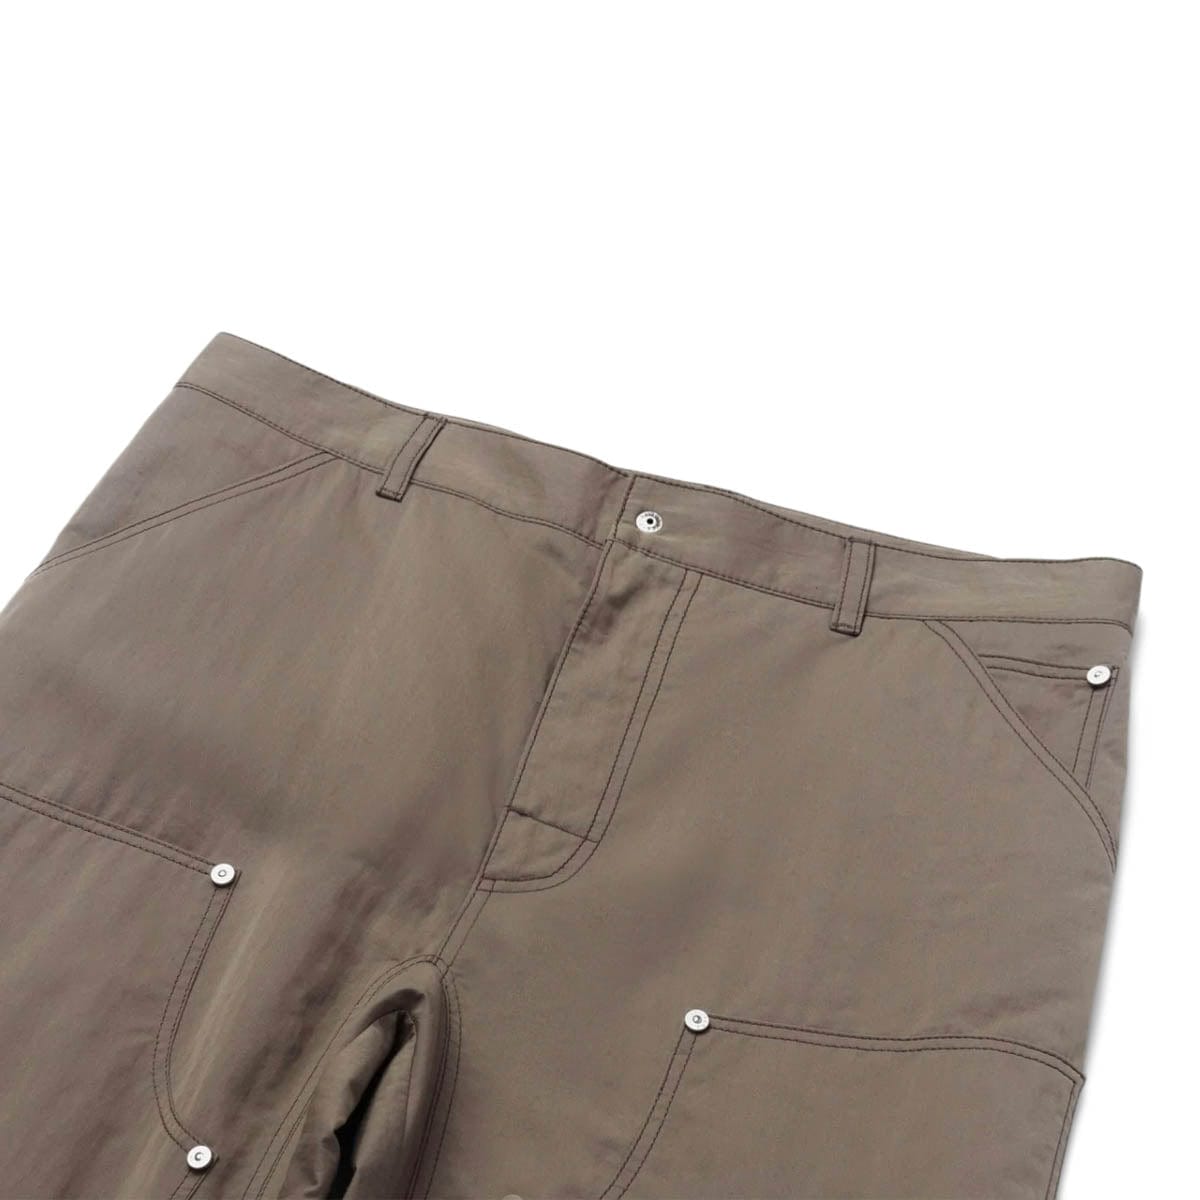 IISE Bottoms DOUBLE FRONT PANT